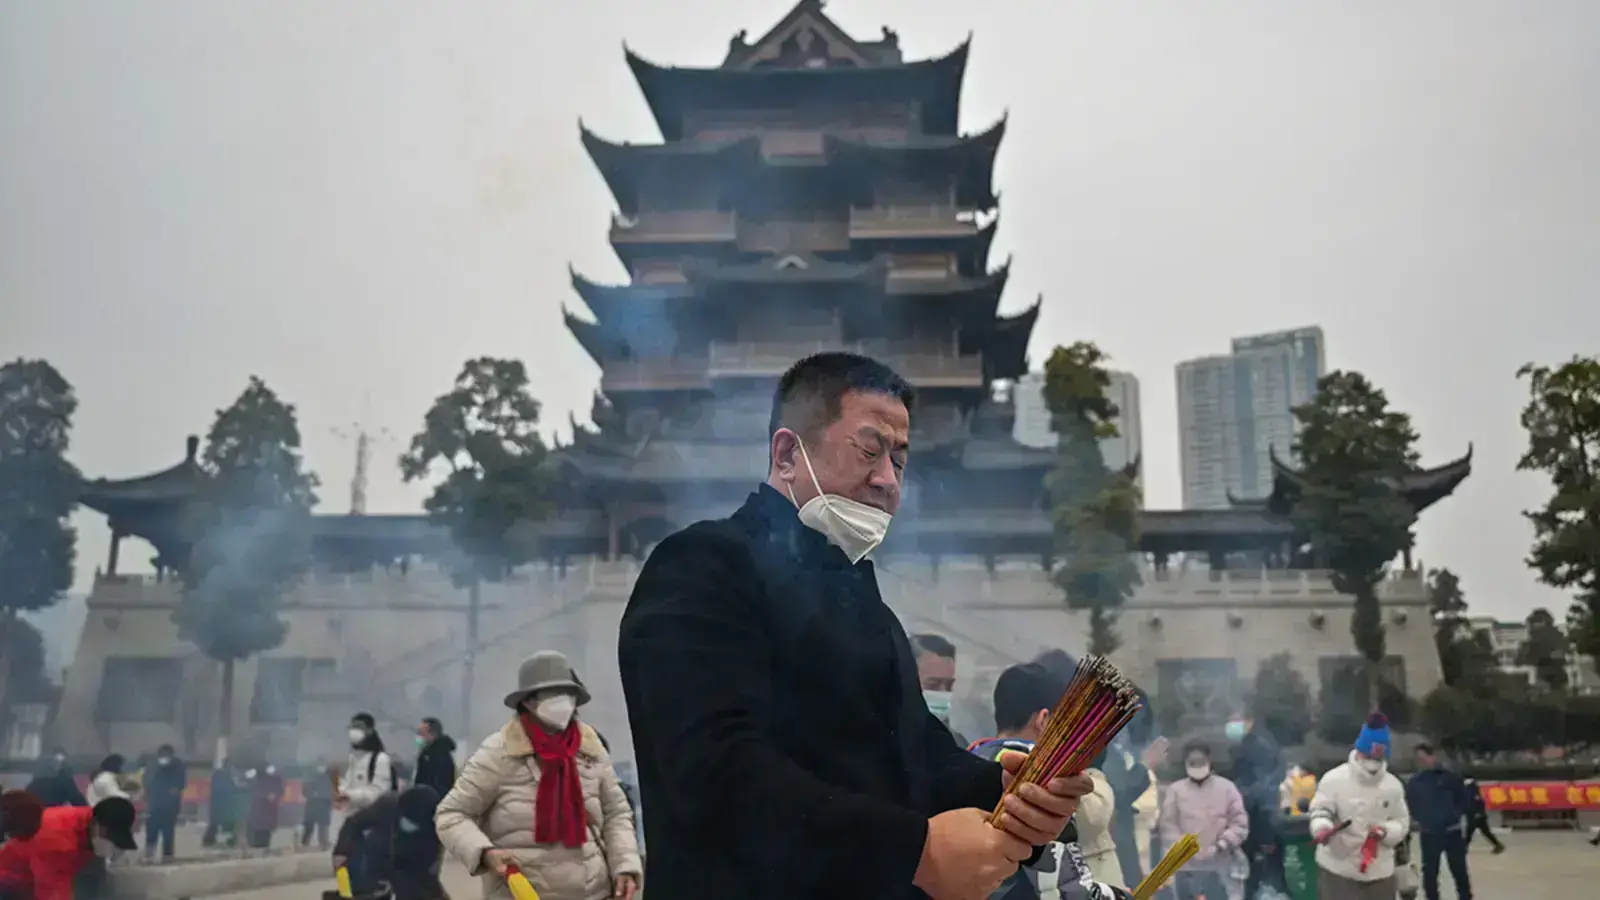 People burn incense at the Buddhist Guiyuan Temple in Wuhan, China.